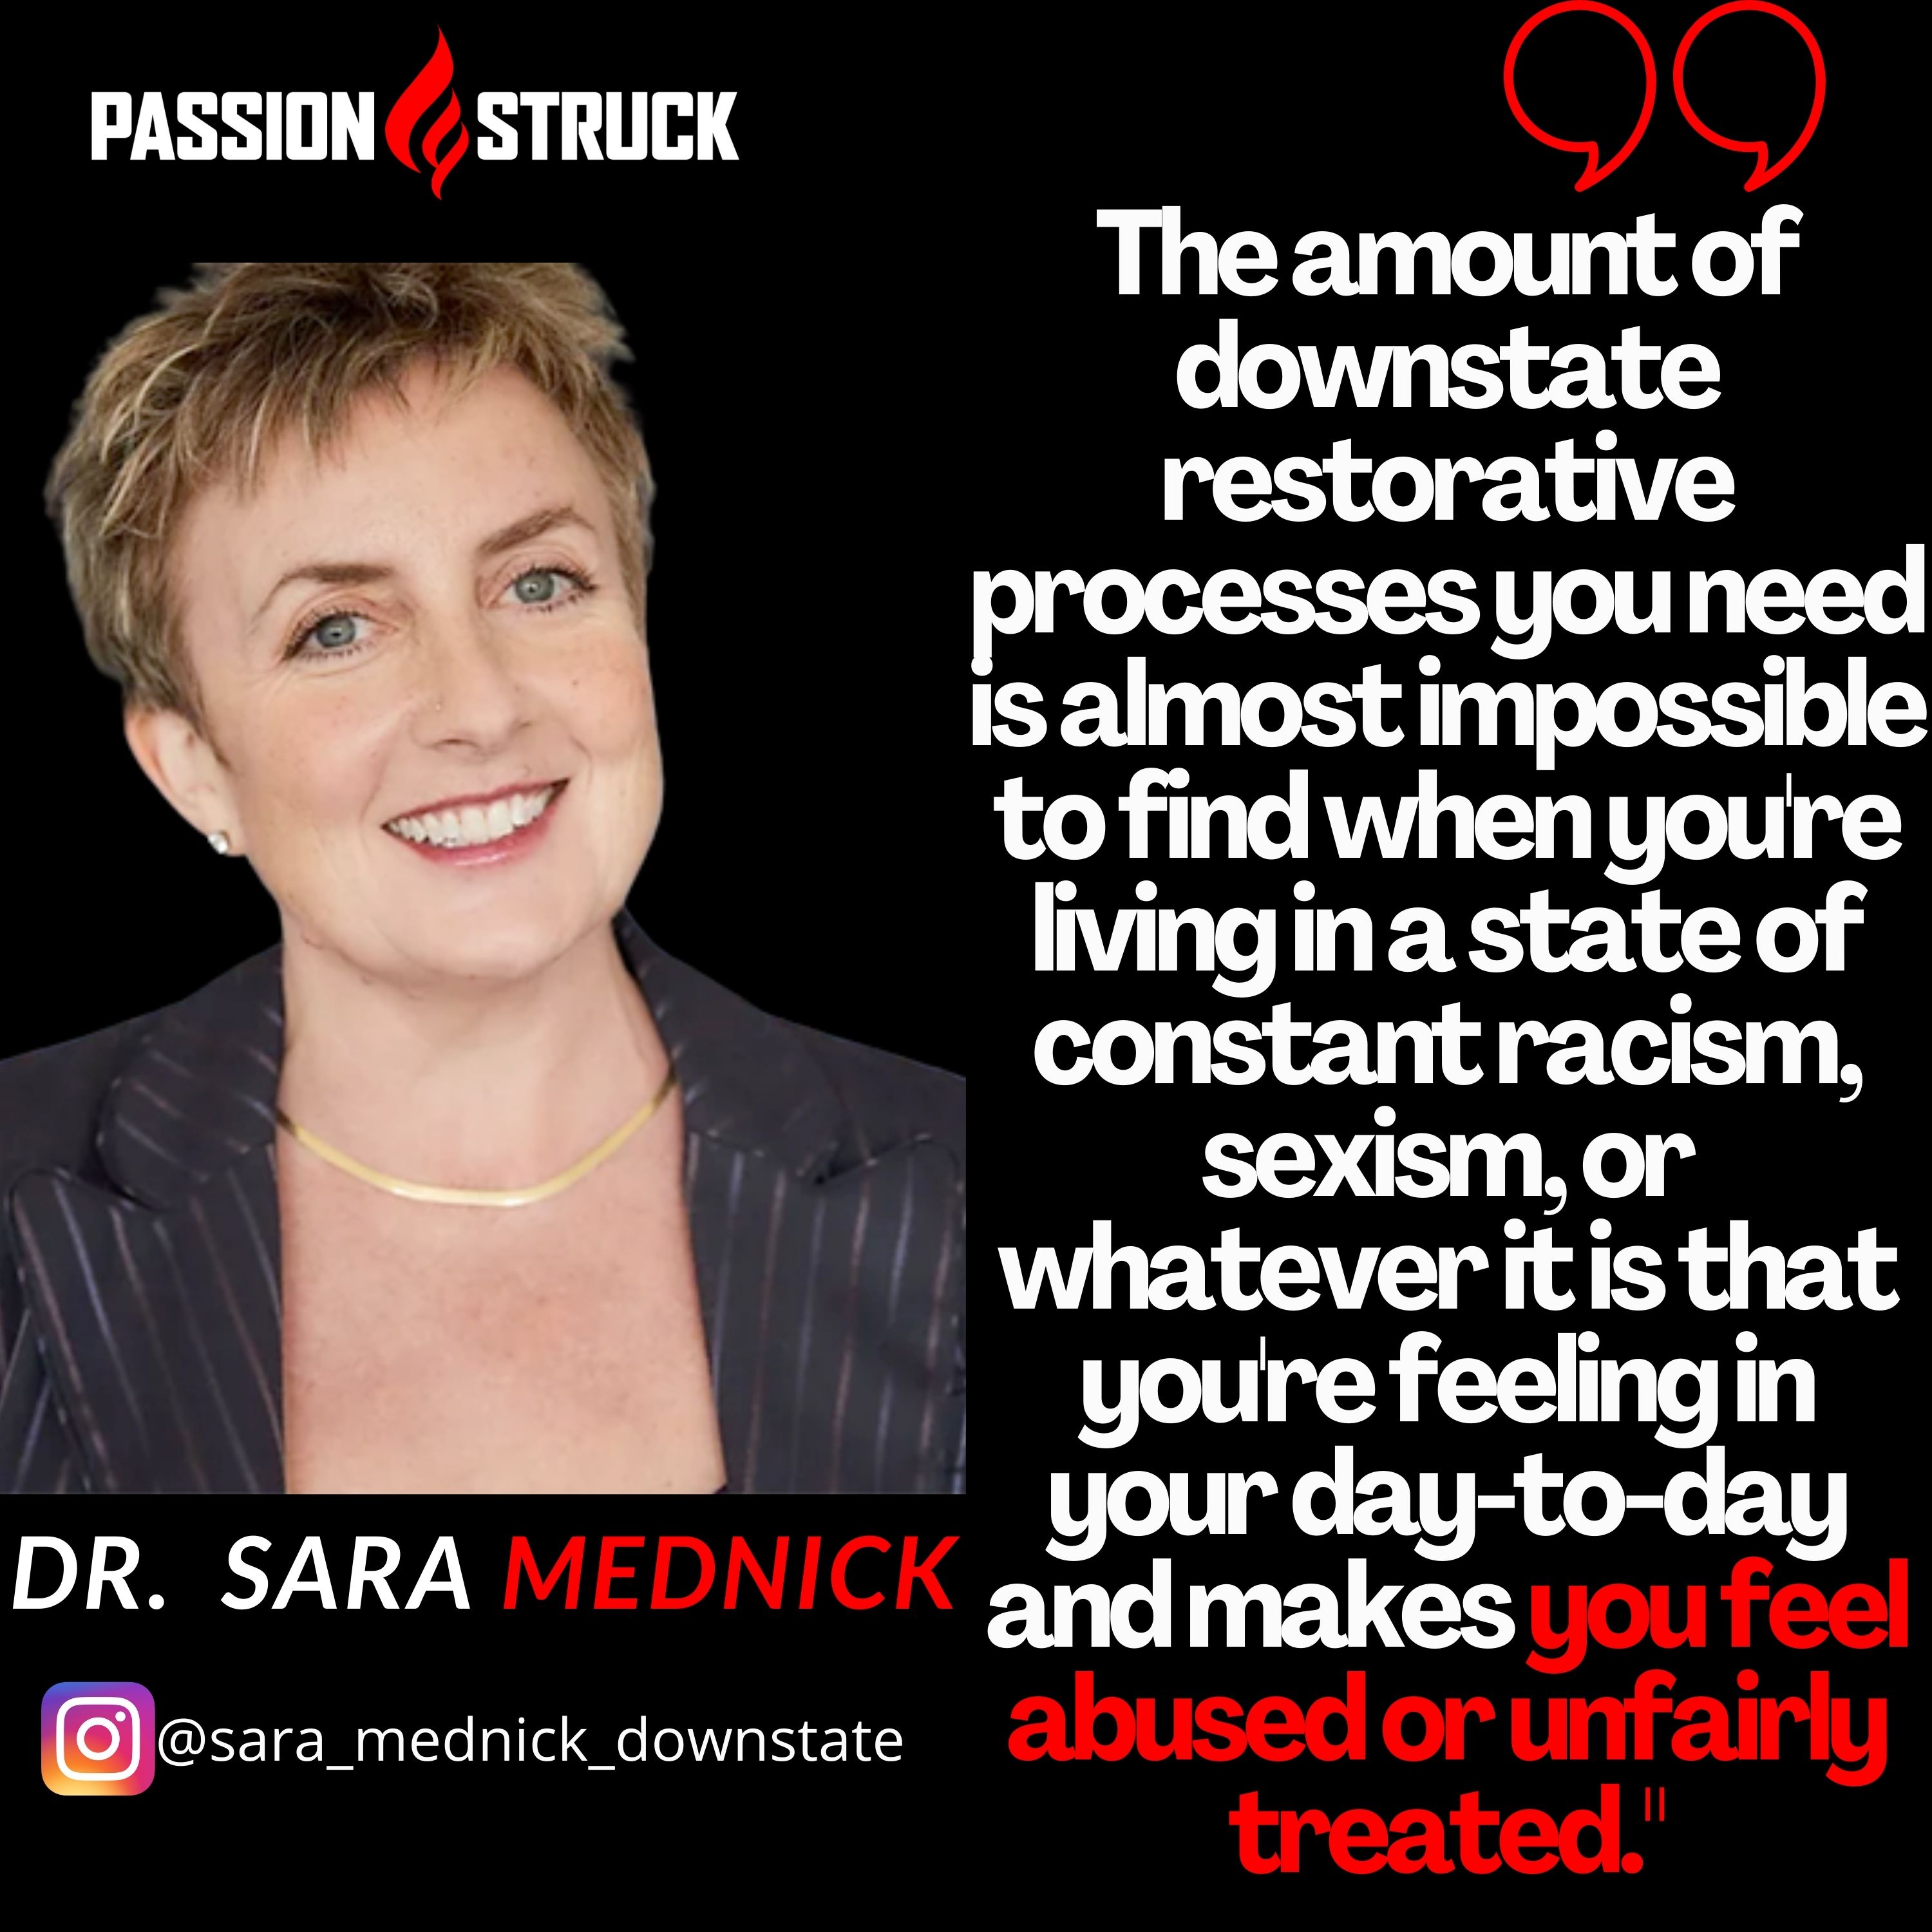 Quote by Dr. Sara Mednick From Passion Struck: "The amount of downstate restorative processes you need is almost impossible to find when you're living in a state of constant racism, sexism, or whatever it is that you're feeling in your day-to-day and makes you feel abused or unfairly treated.'eated.'